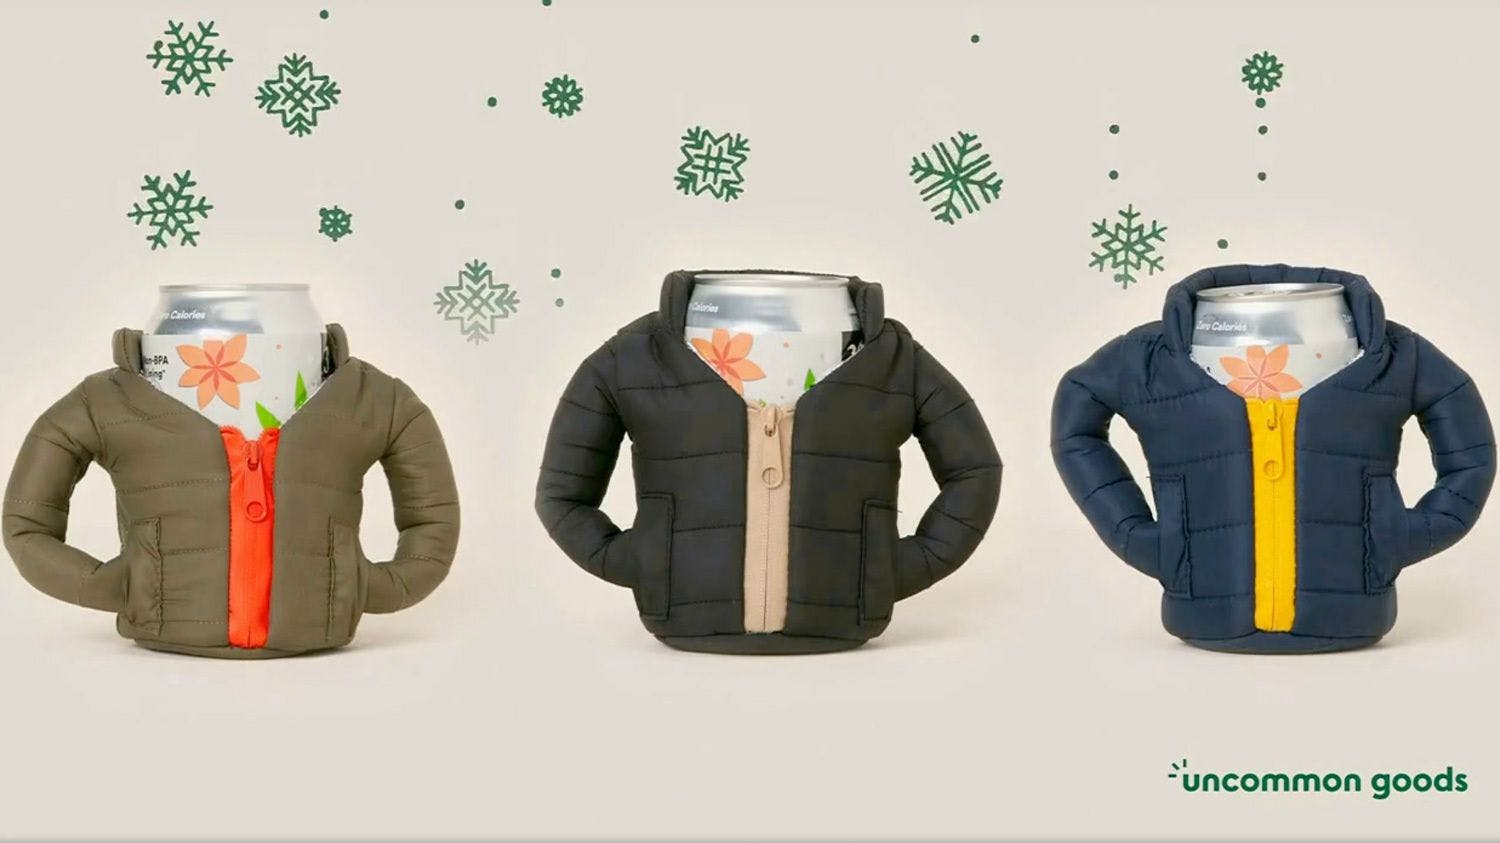 an image featuring three cans of drinks in mini jackets from an Uncommon Goods ad